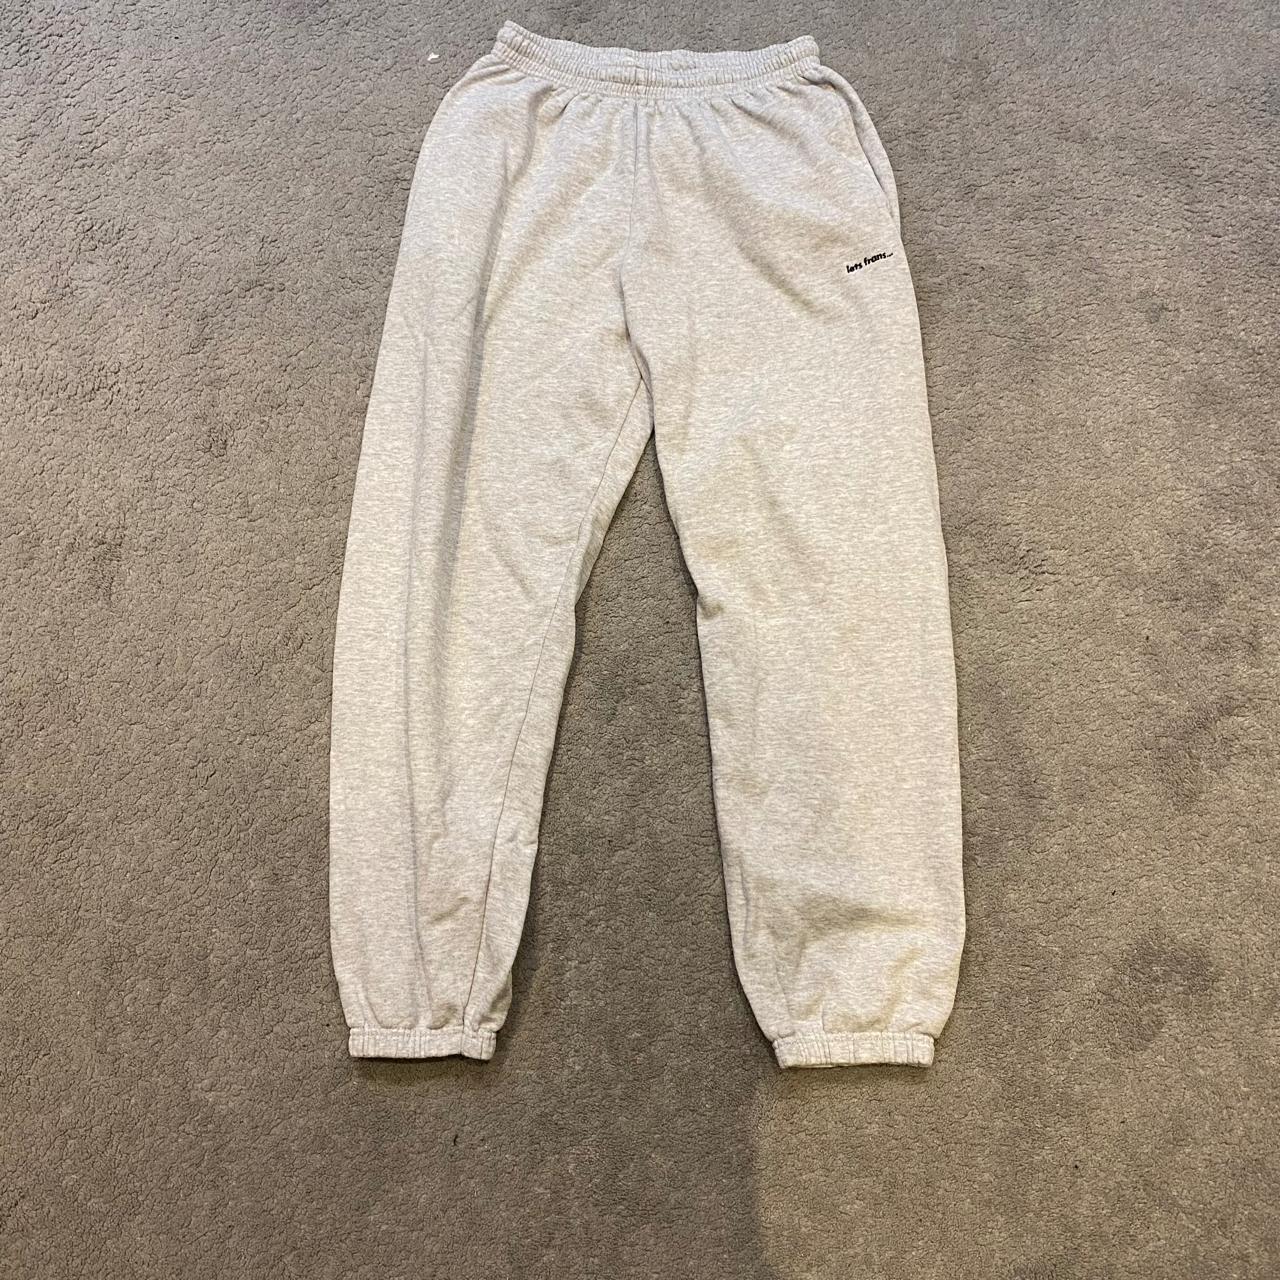 UO Iets frans grey joggers size: medium (refer to UO... - Depop